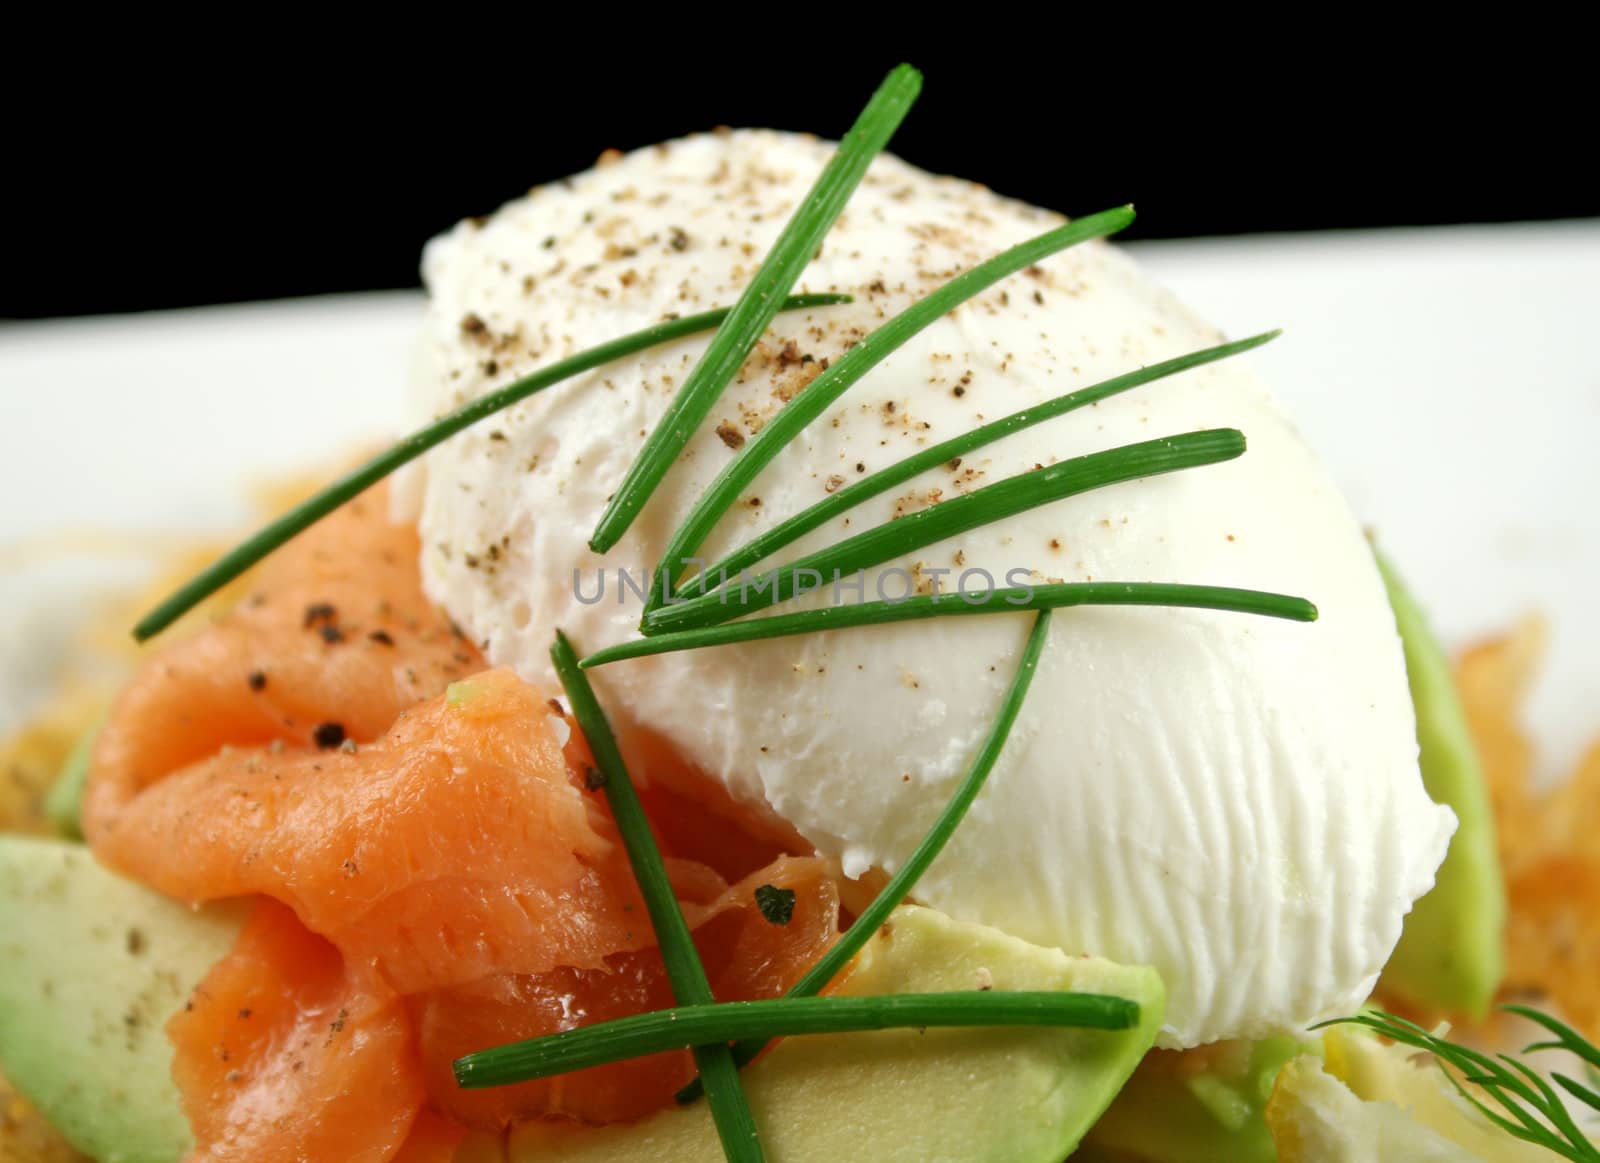 Beautiful salmon and poached egg stack with avocado.